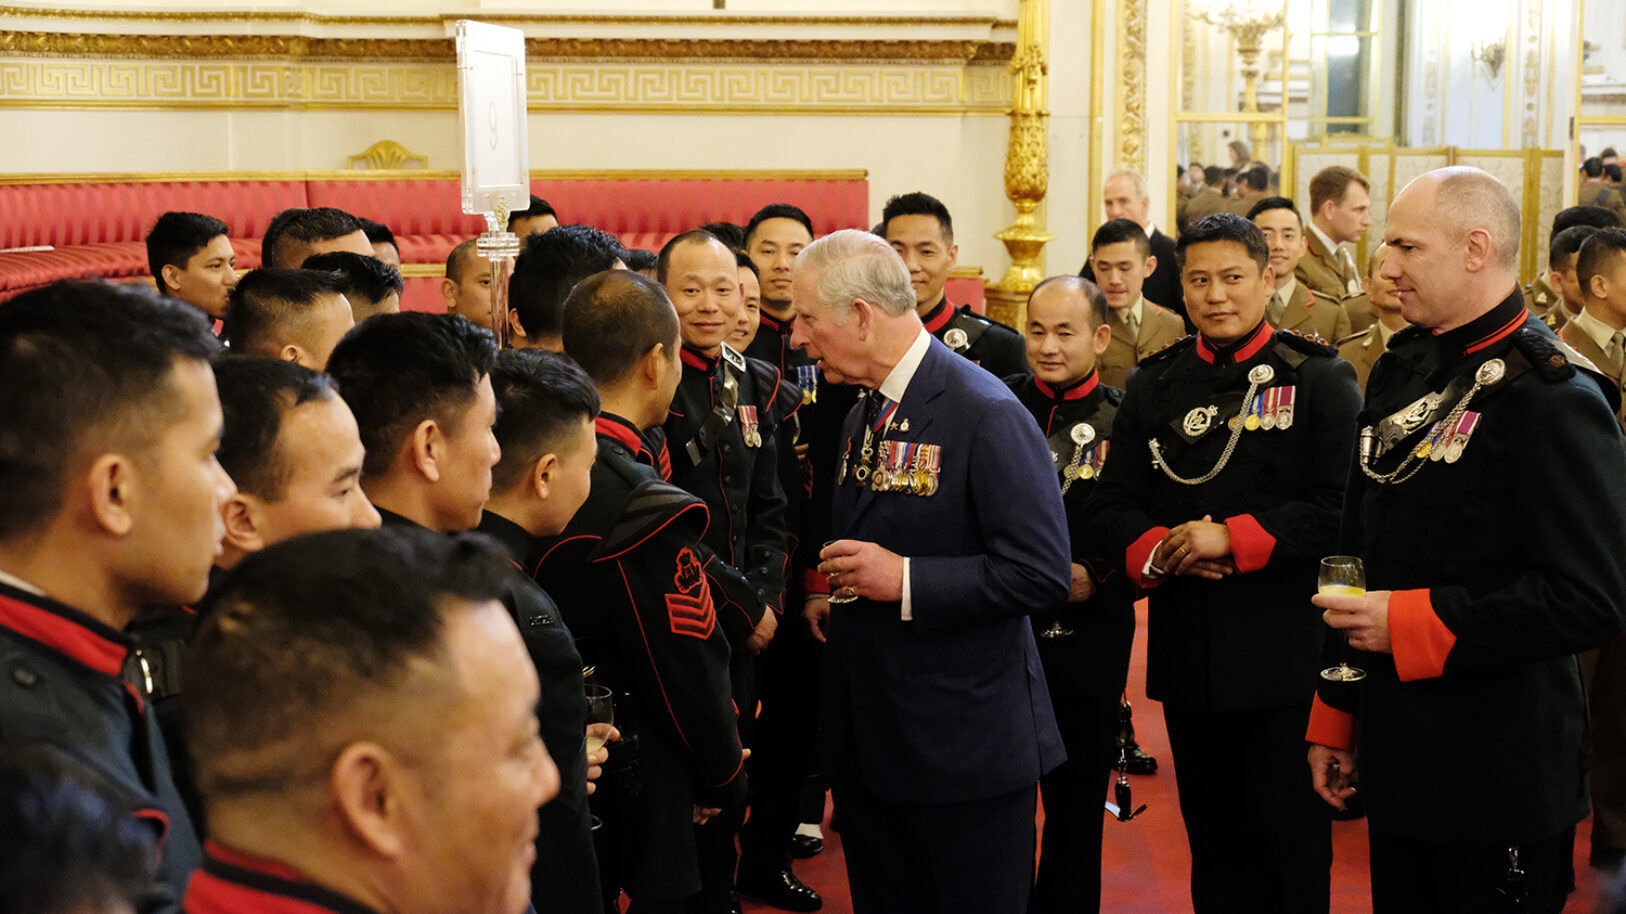 Operation TORAL medals presented The Second Battalion, The Royal Gurkha Rifles at the Palace